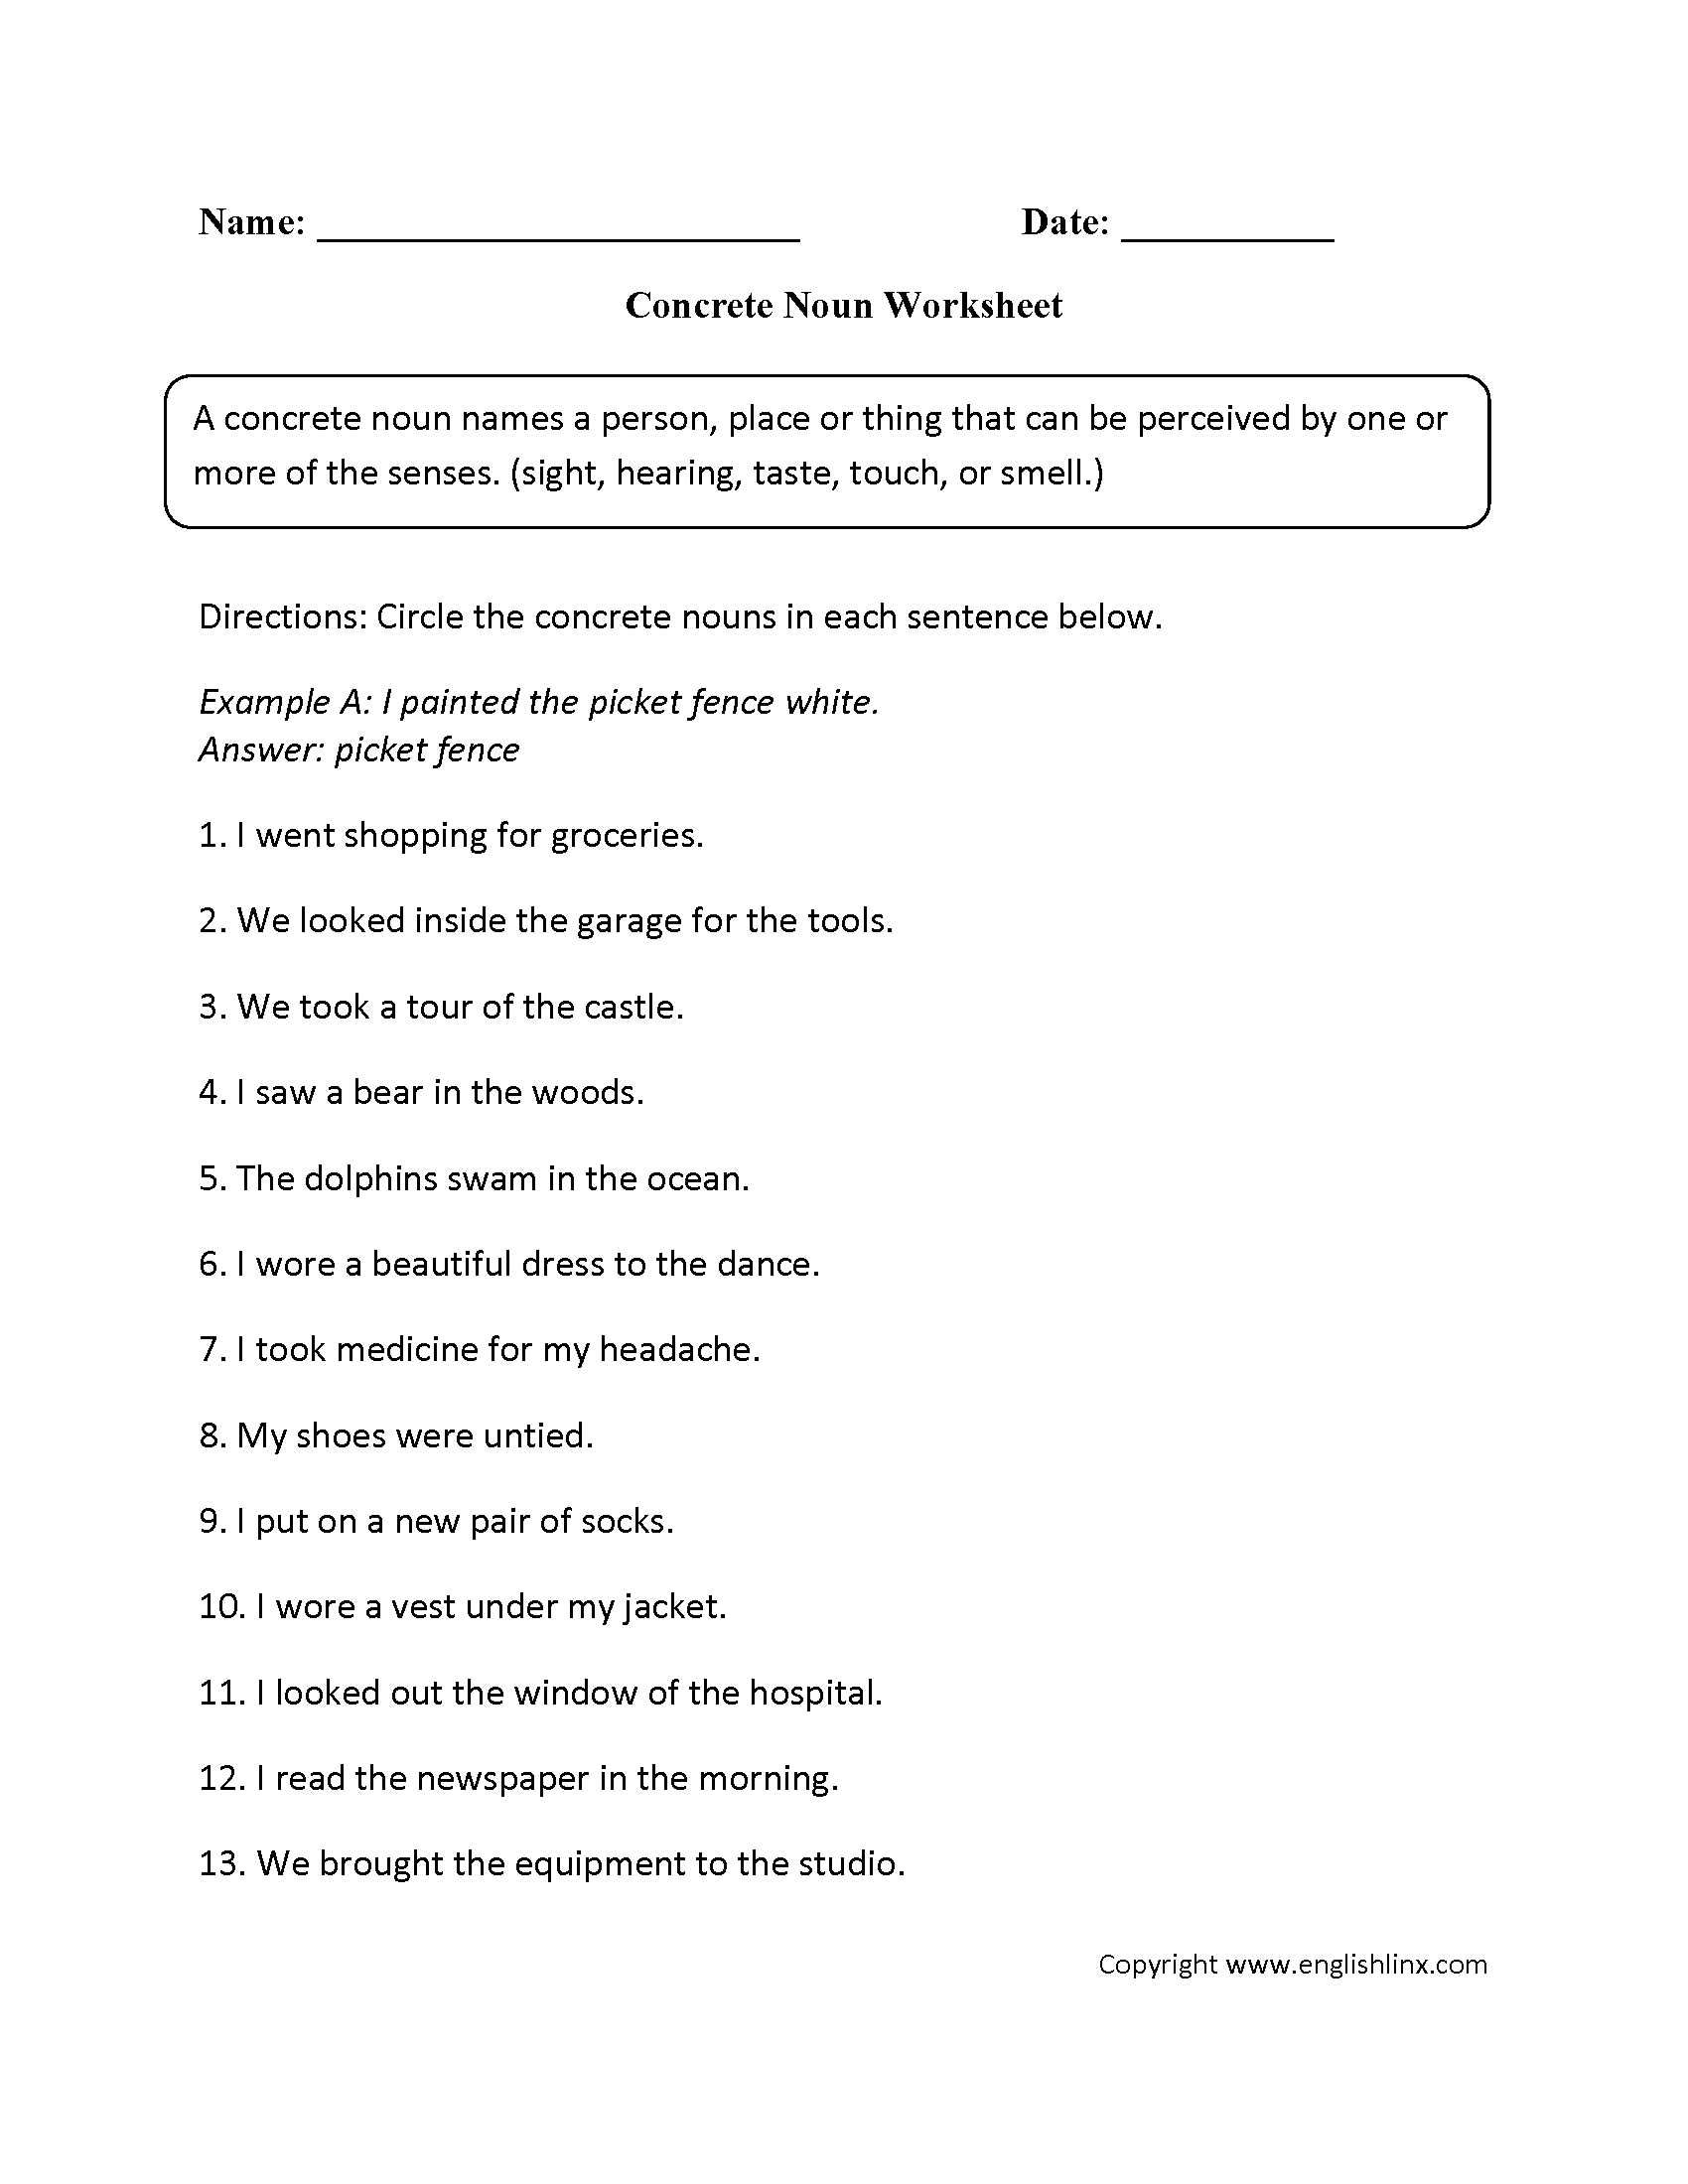 concrete-and-abstract-nouns-worksheet